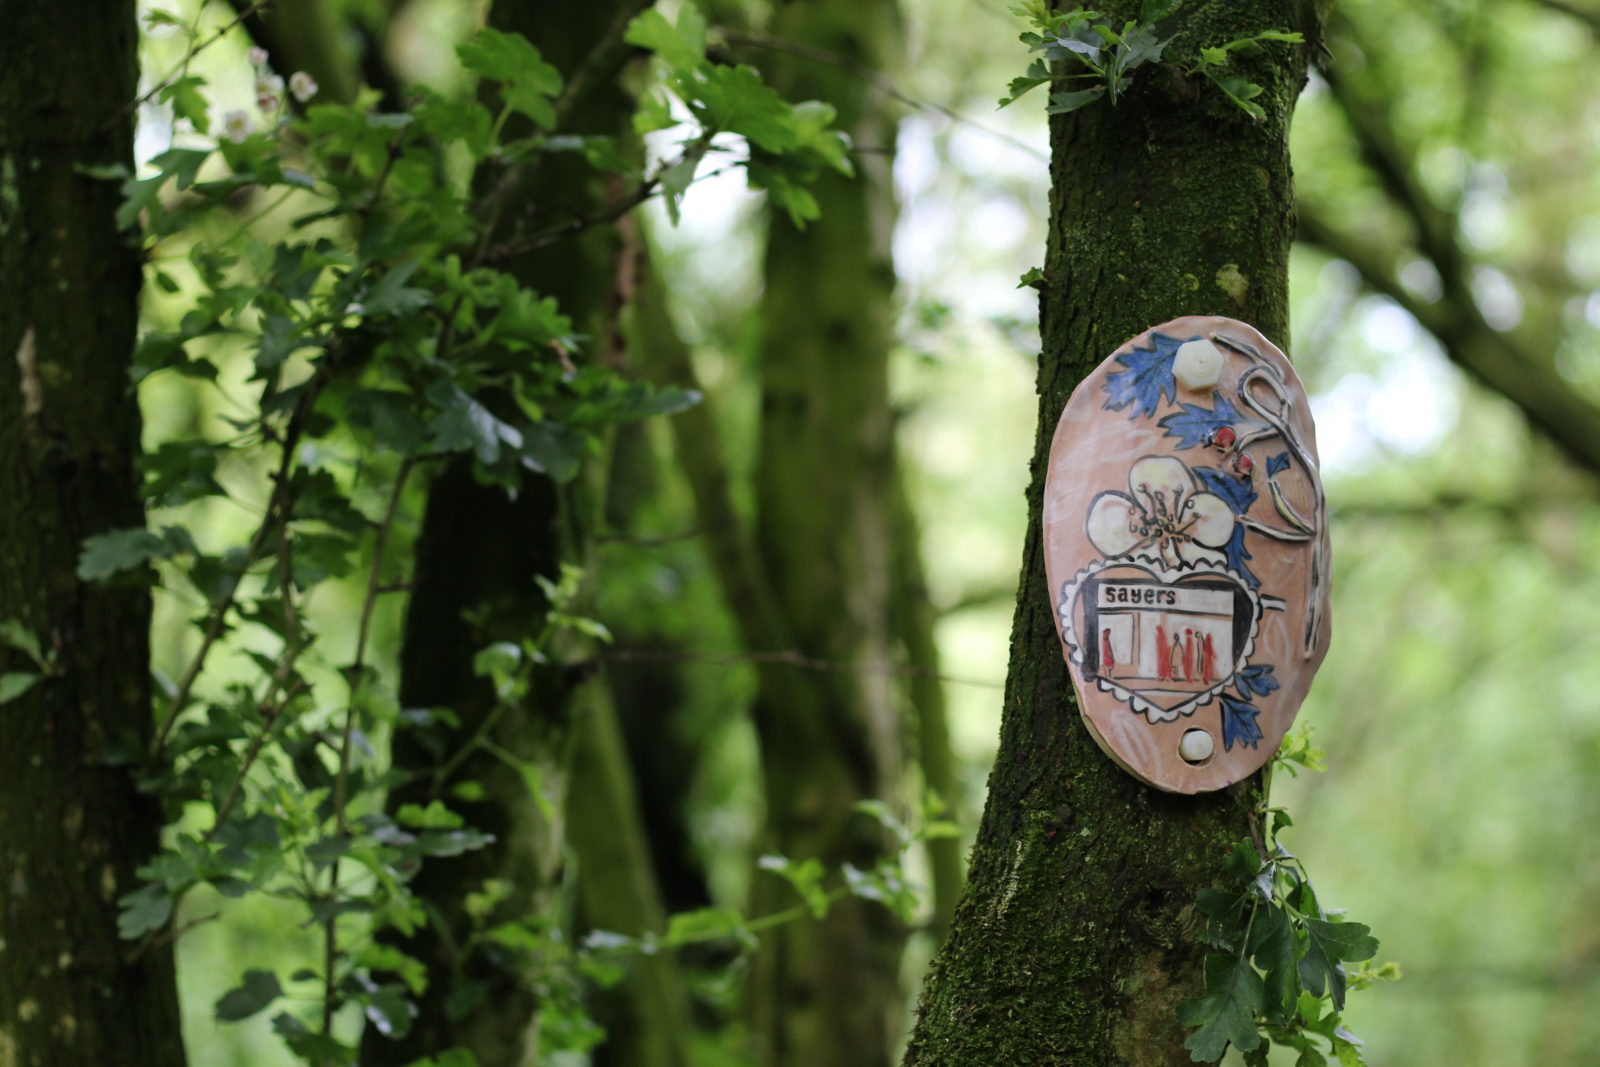 A clay artwork featuring a bakery, a flower and leaves is attached to a tree.